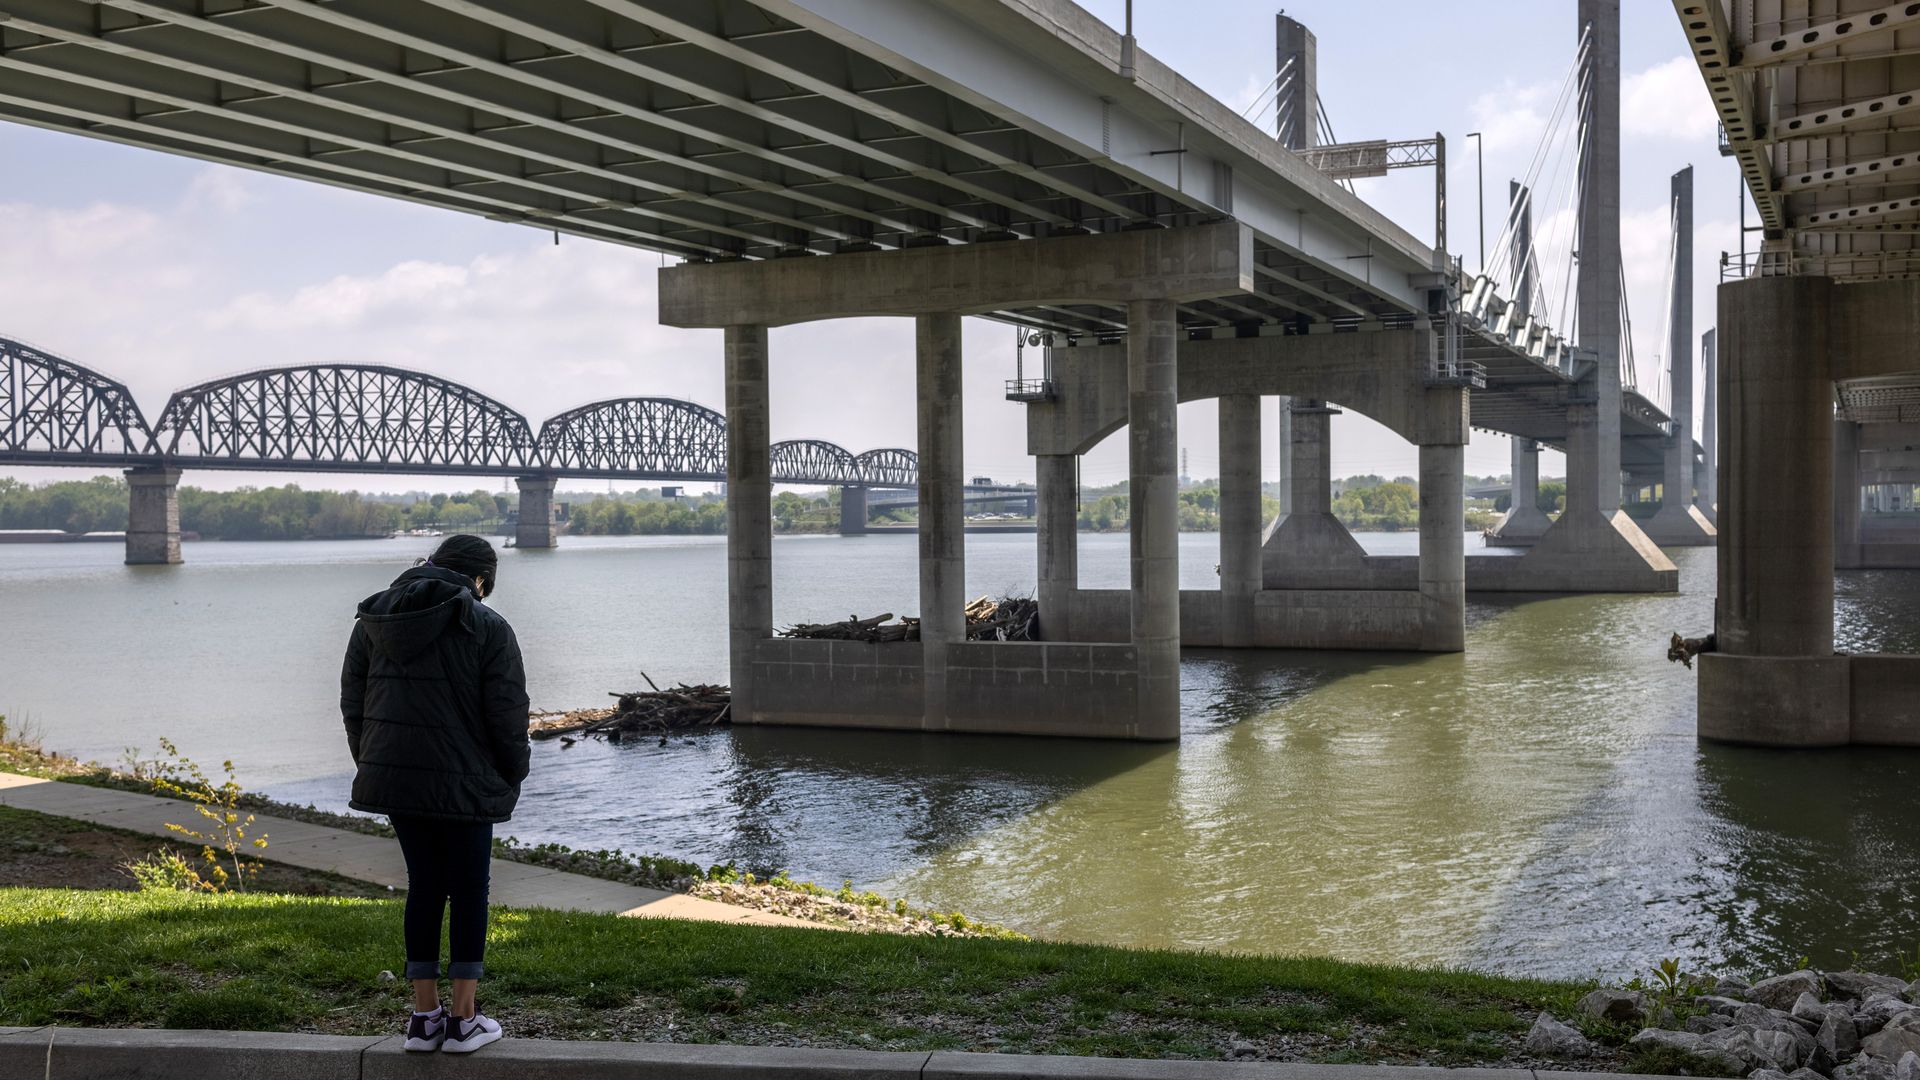 A migrant child sent on to the United States after her mother was expelled under Title 42 is seen looking out at a river in Indiana.